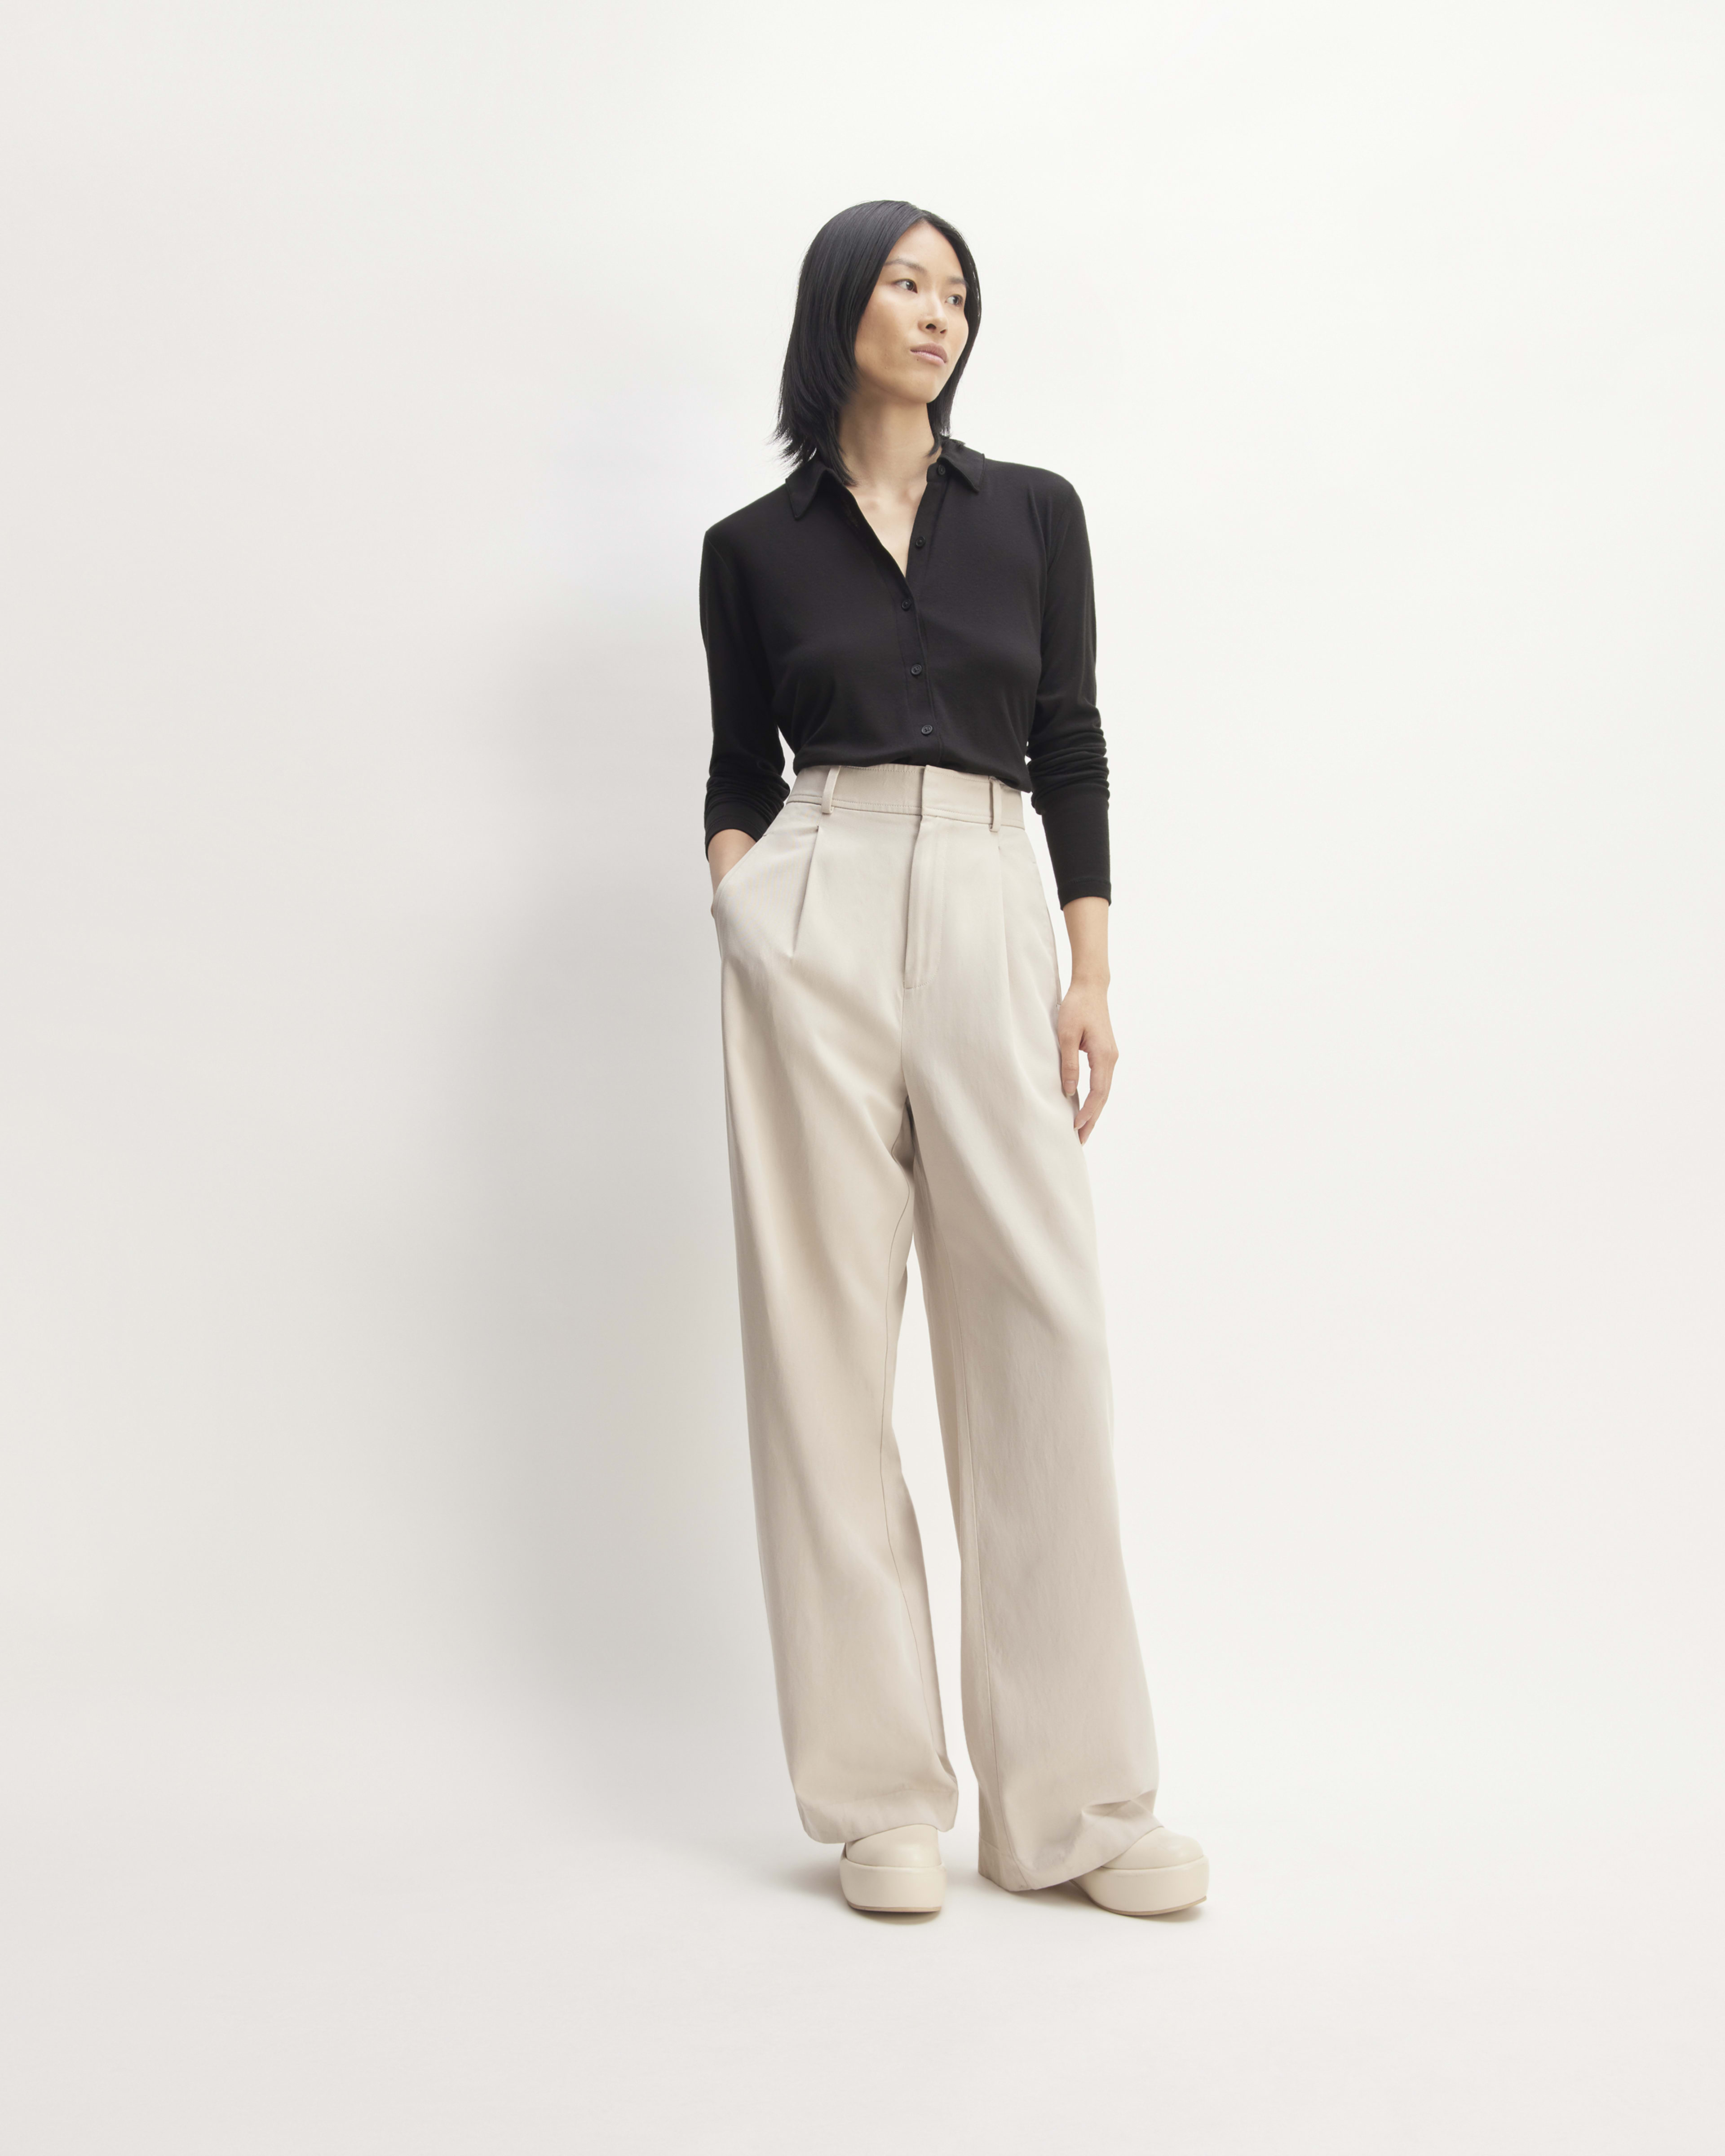 Elevated, versatile style inspo from @jordanrisa in our new Dream Kick  Flare pant. #Everlane #EverlaneKickFlarePant #TheKickFlarePant #T